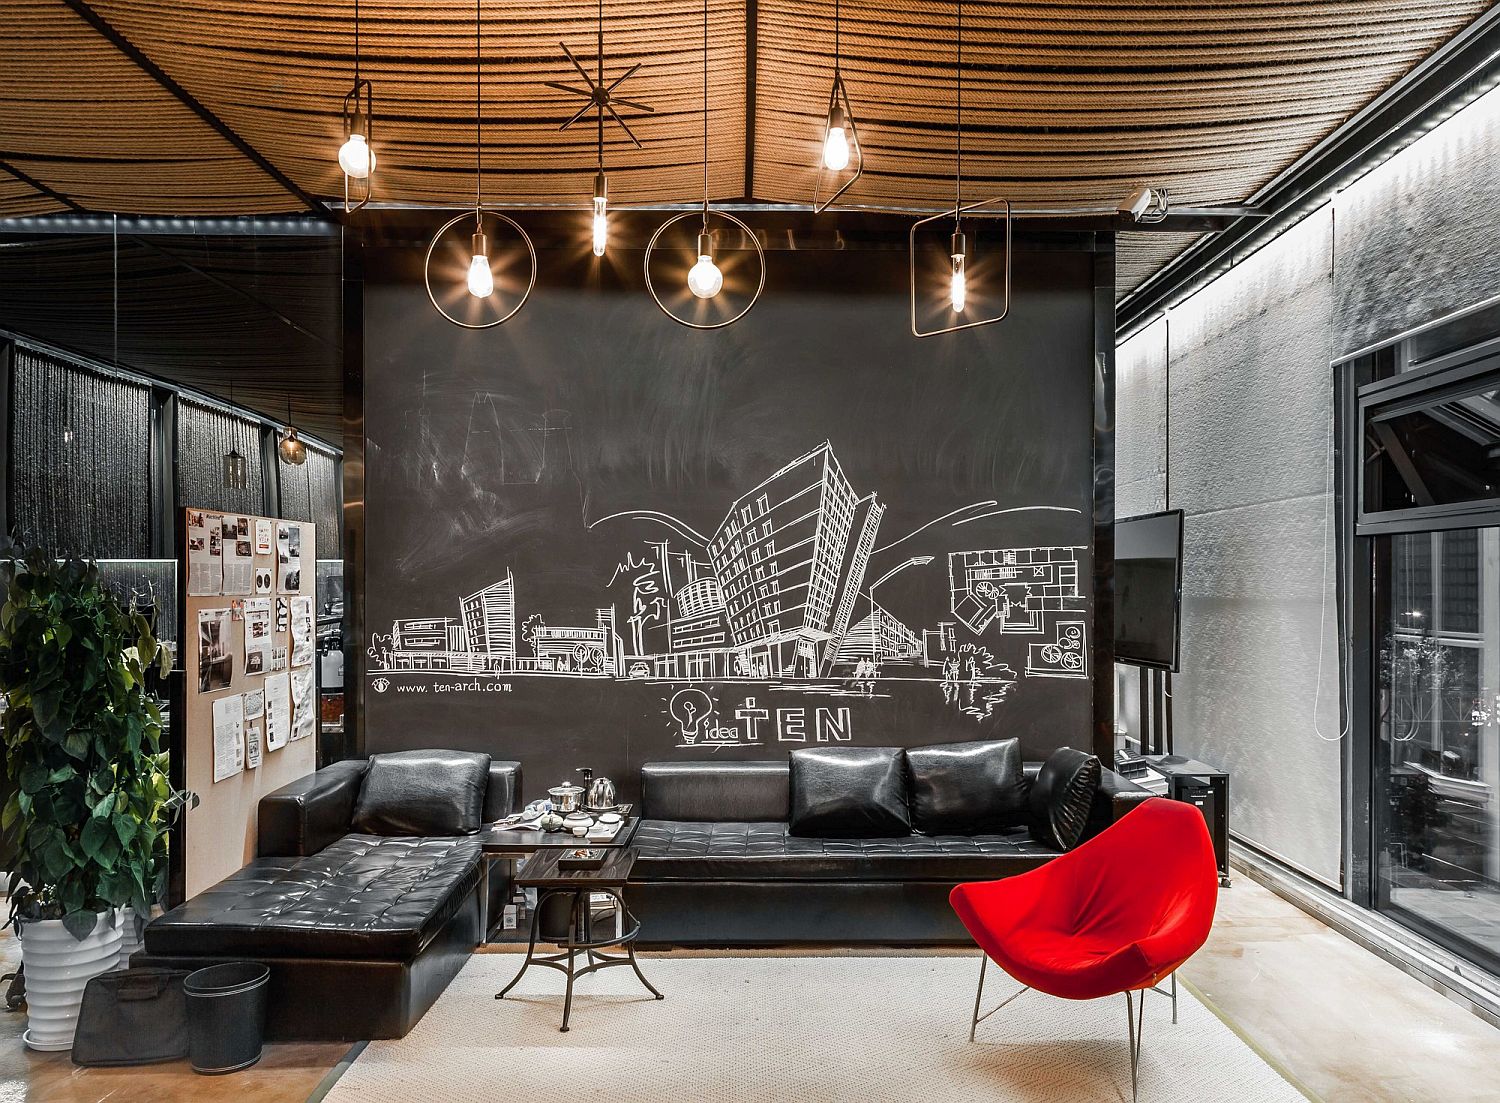 Meeting-room-of-the-office-with-chalkboard-wall-and-rope-ceiling